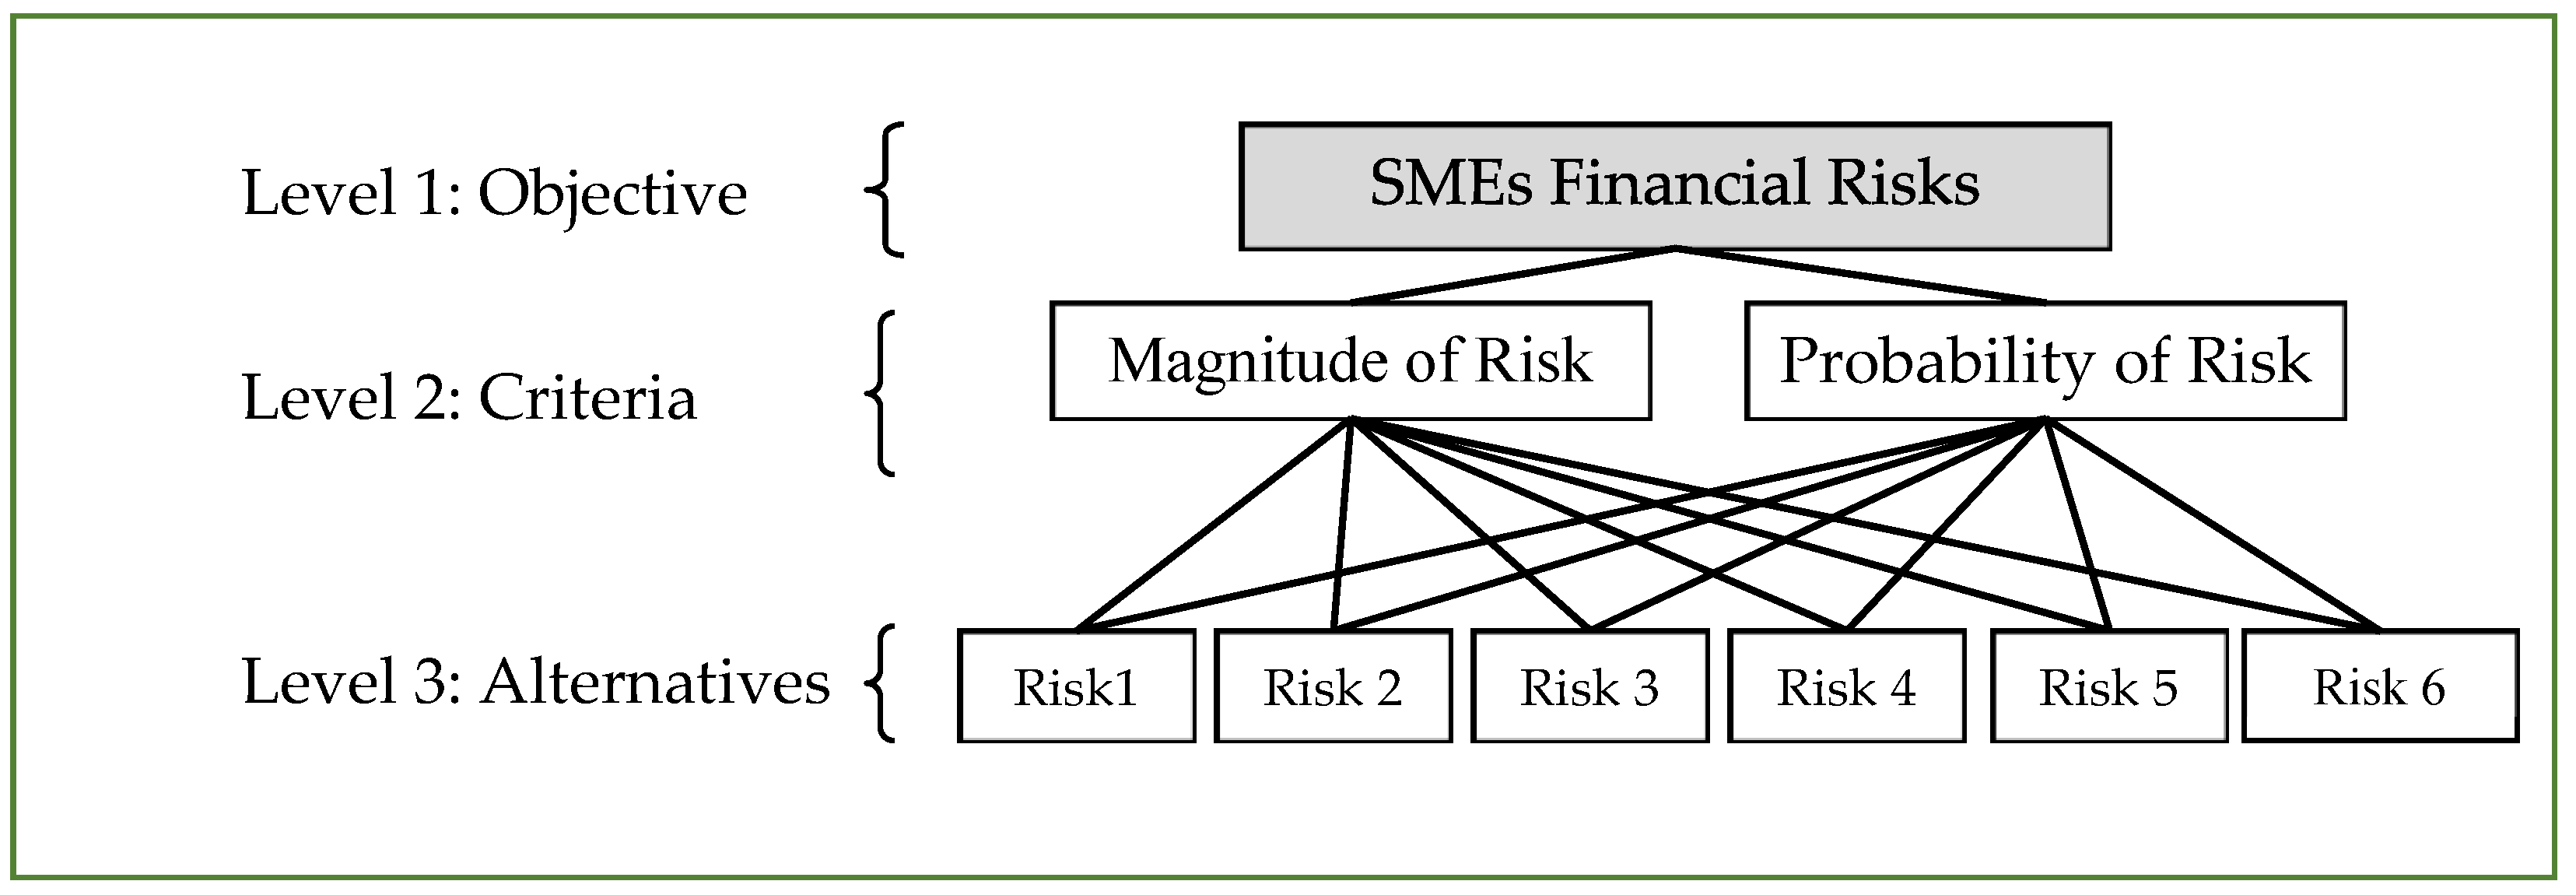 Small and Medium Enterprises and Global Risks: Evidence from